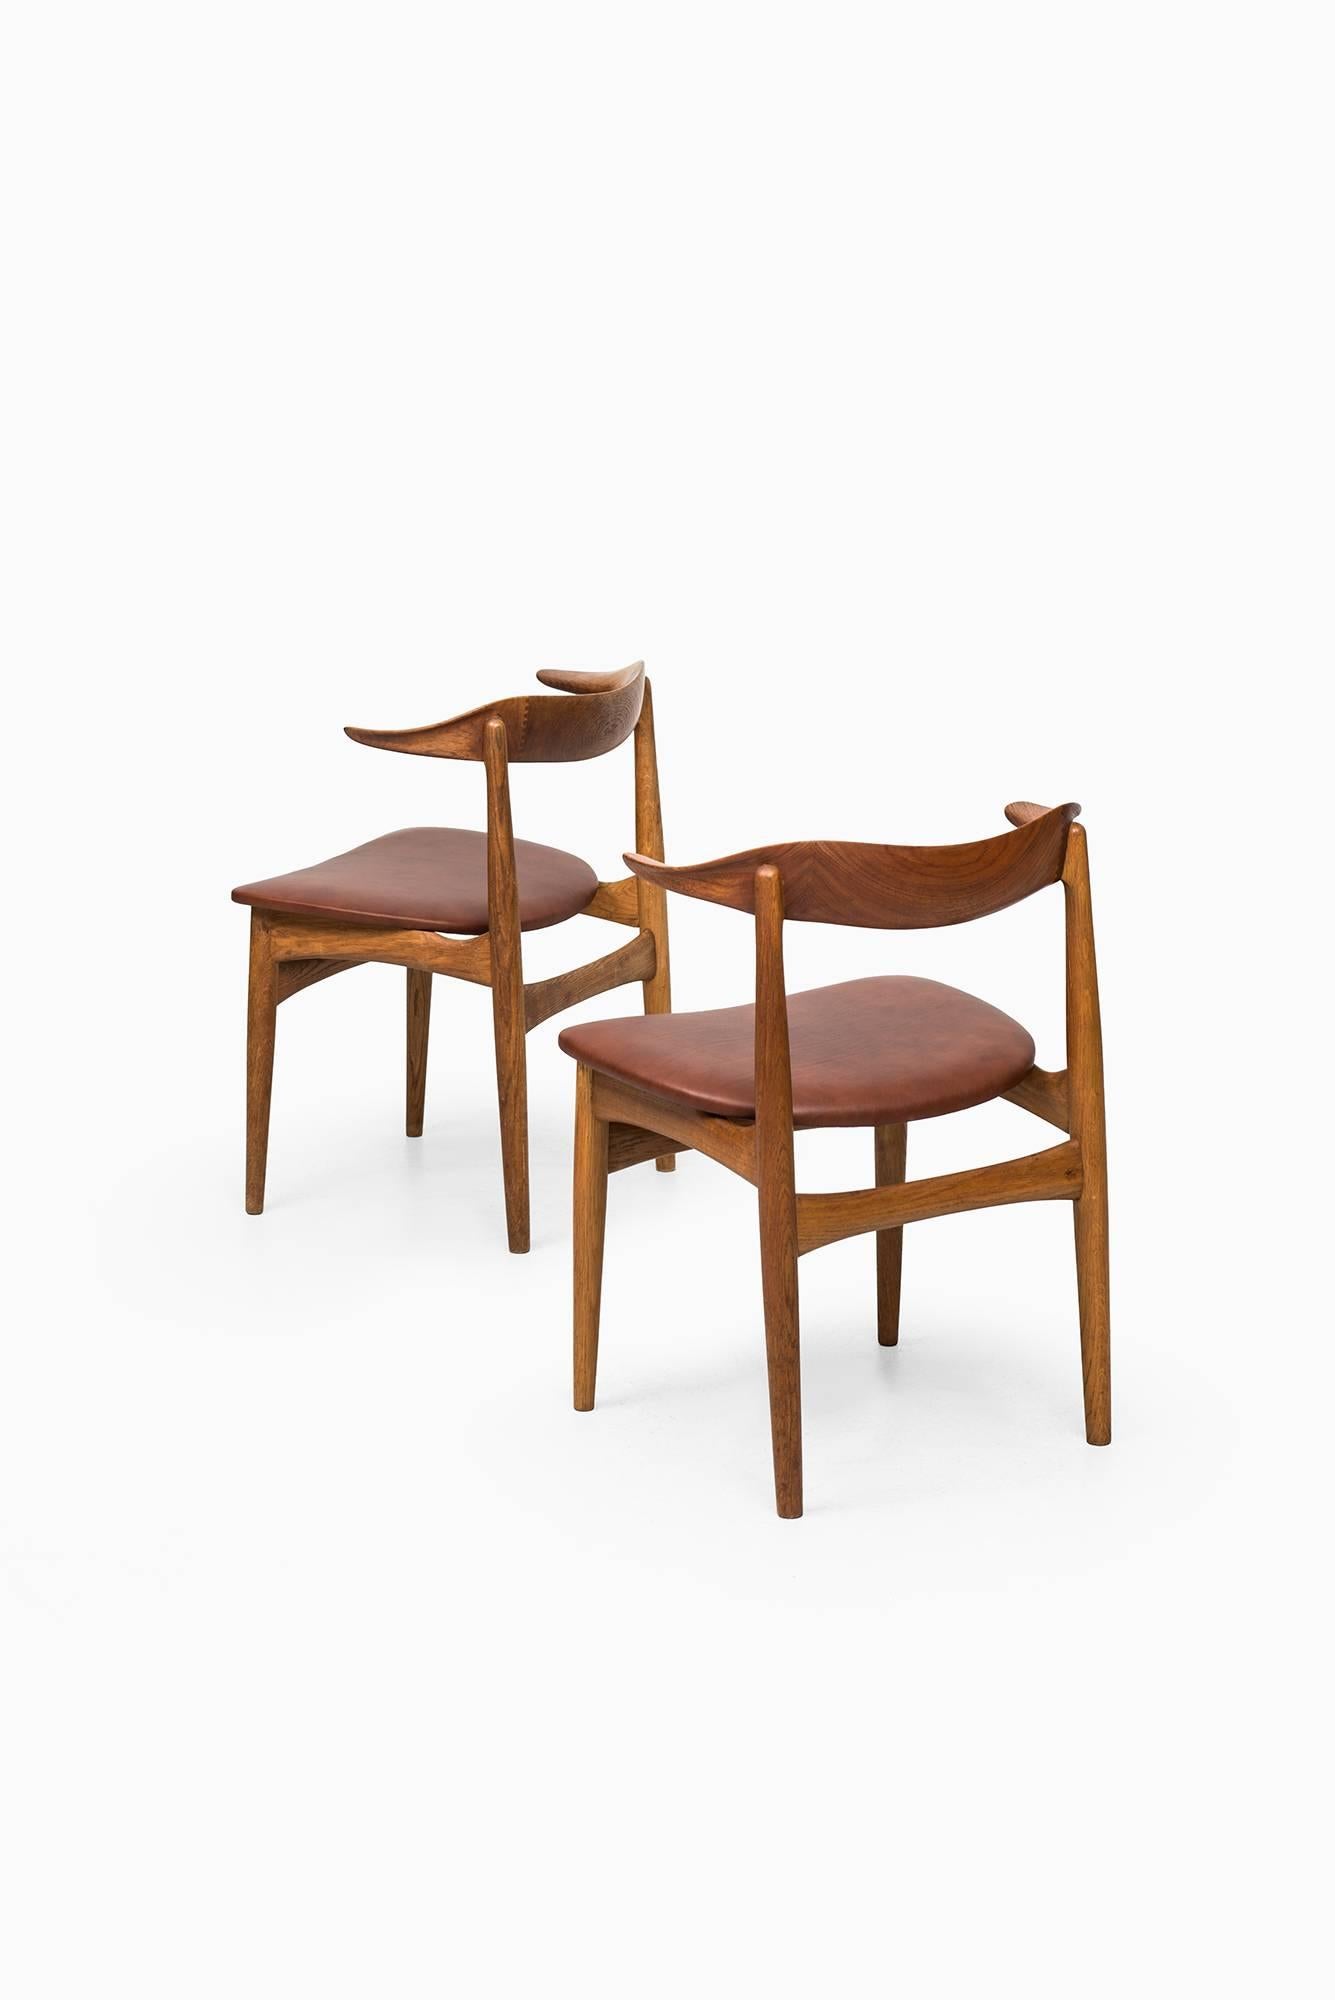 Mid-20th Century Cowhorn Chairs Designed by Knud Faerch Produced by Slagelse Møbelfabrik